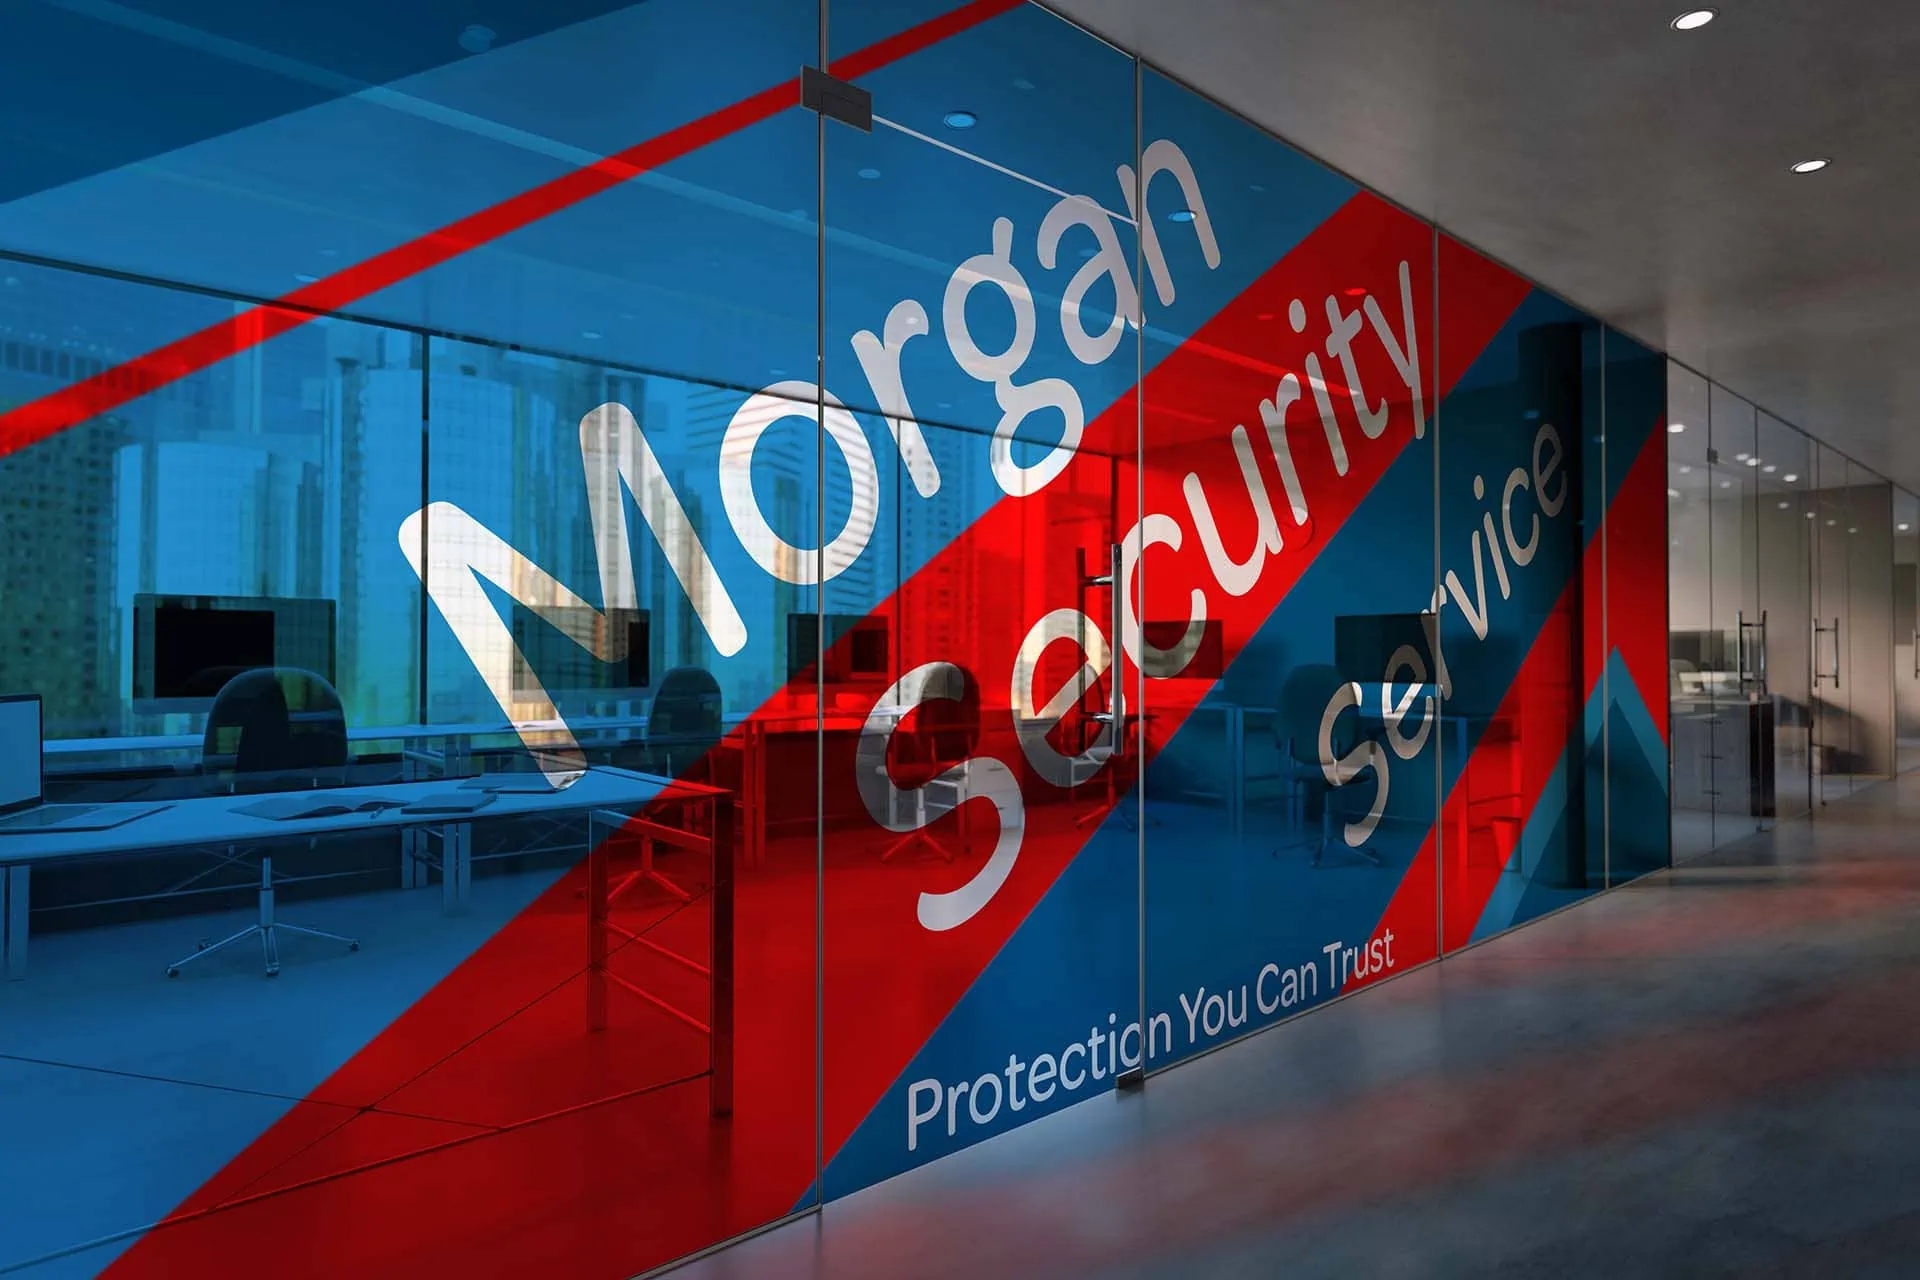 Morgan Security News - Morgan Security Training Service and protection you can Trust.